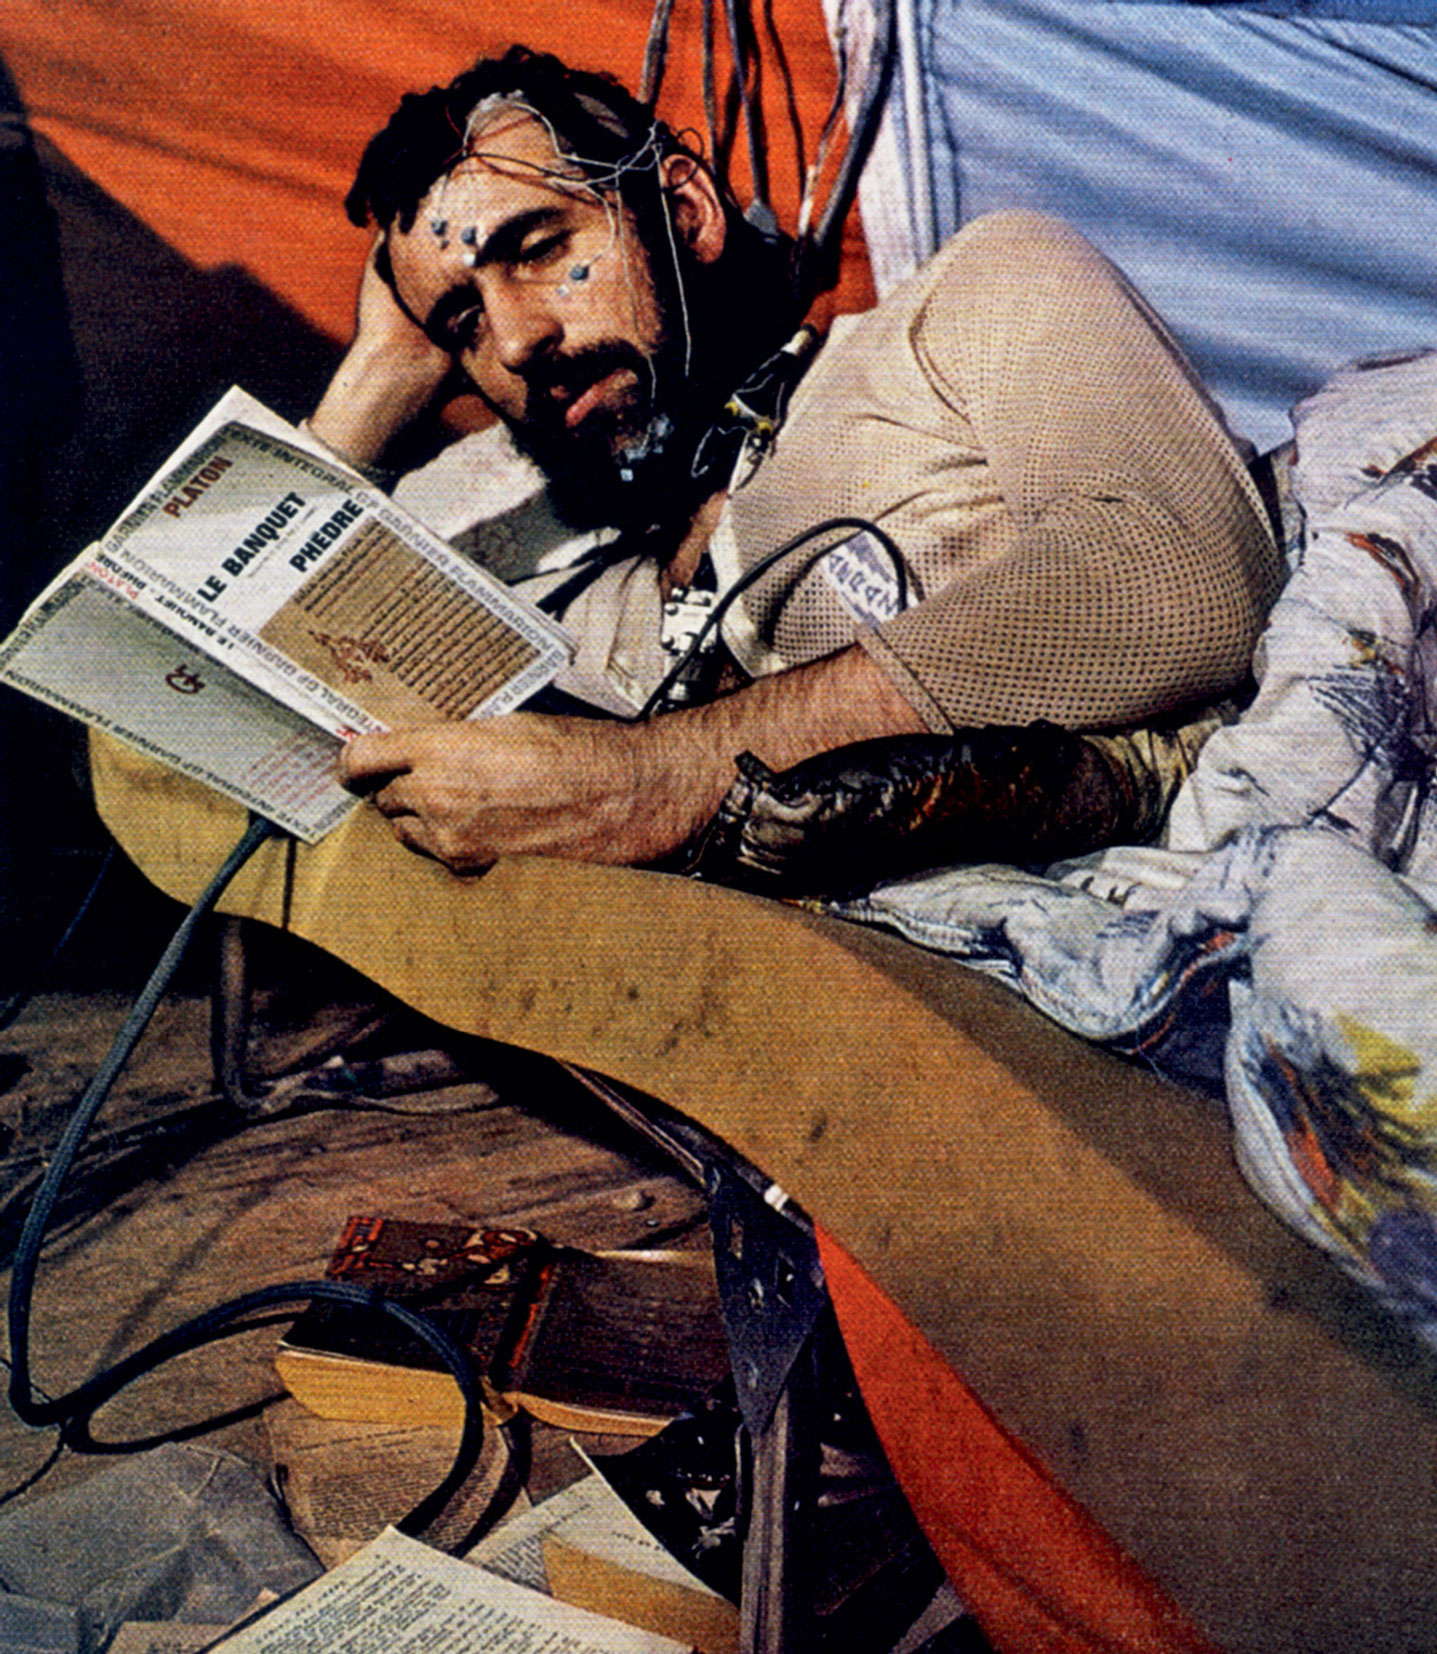 A photograph of Siffre reading Plato in the cave.